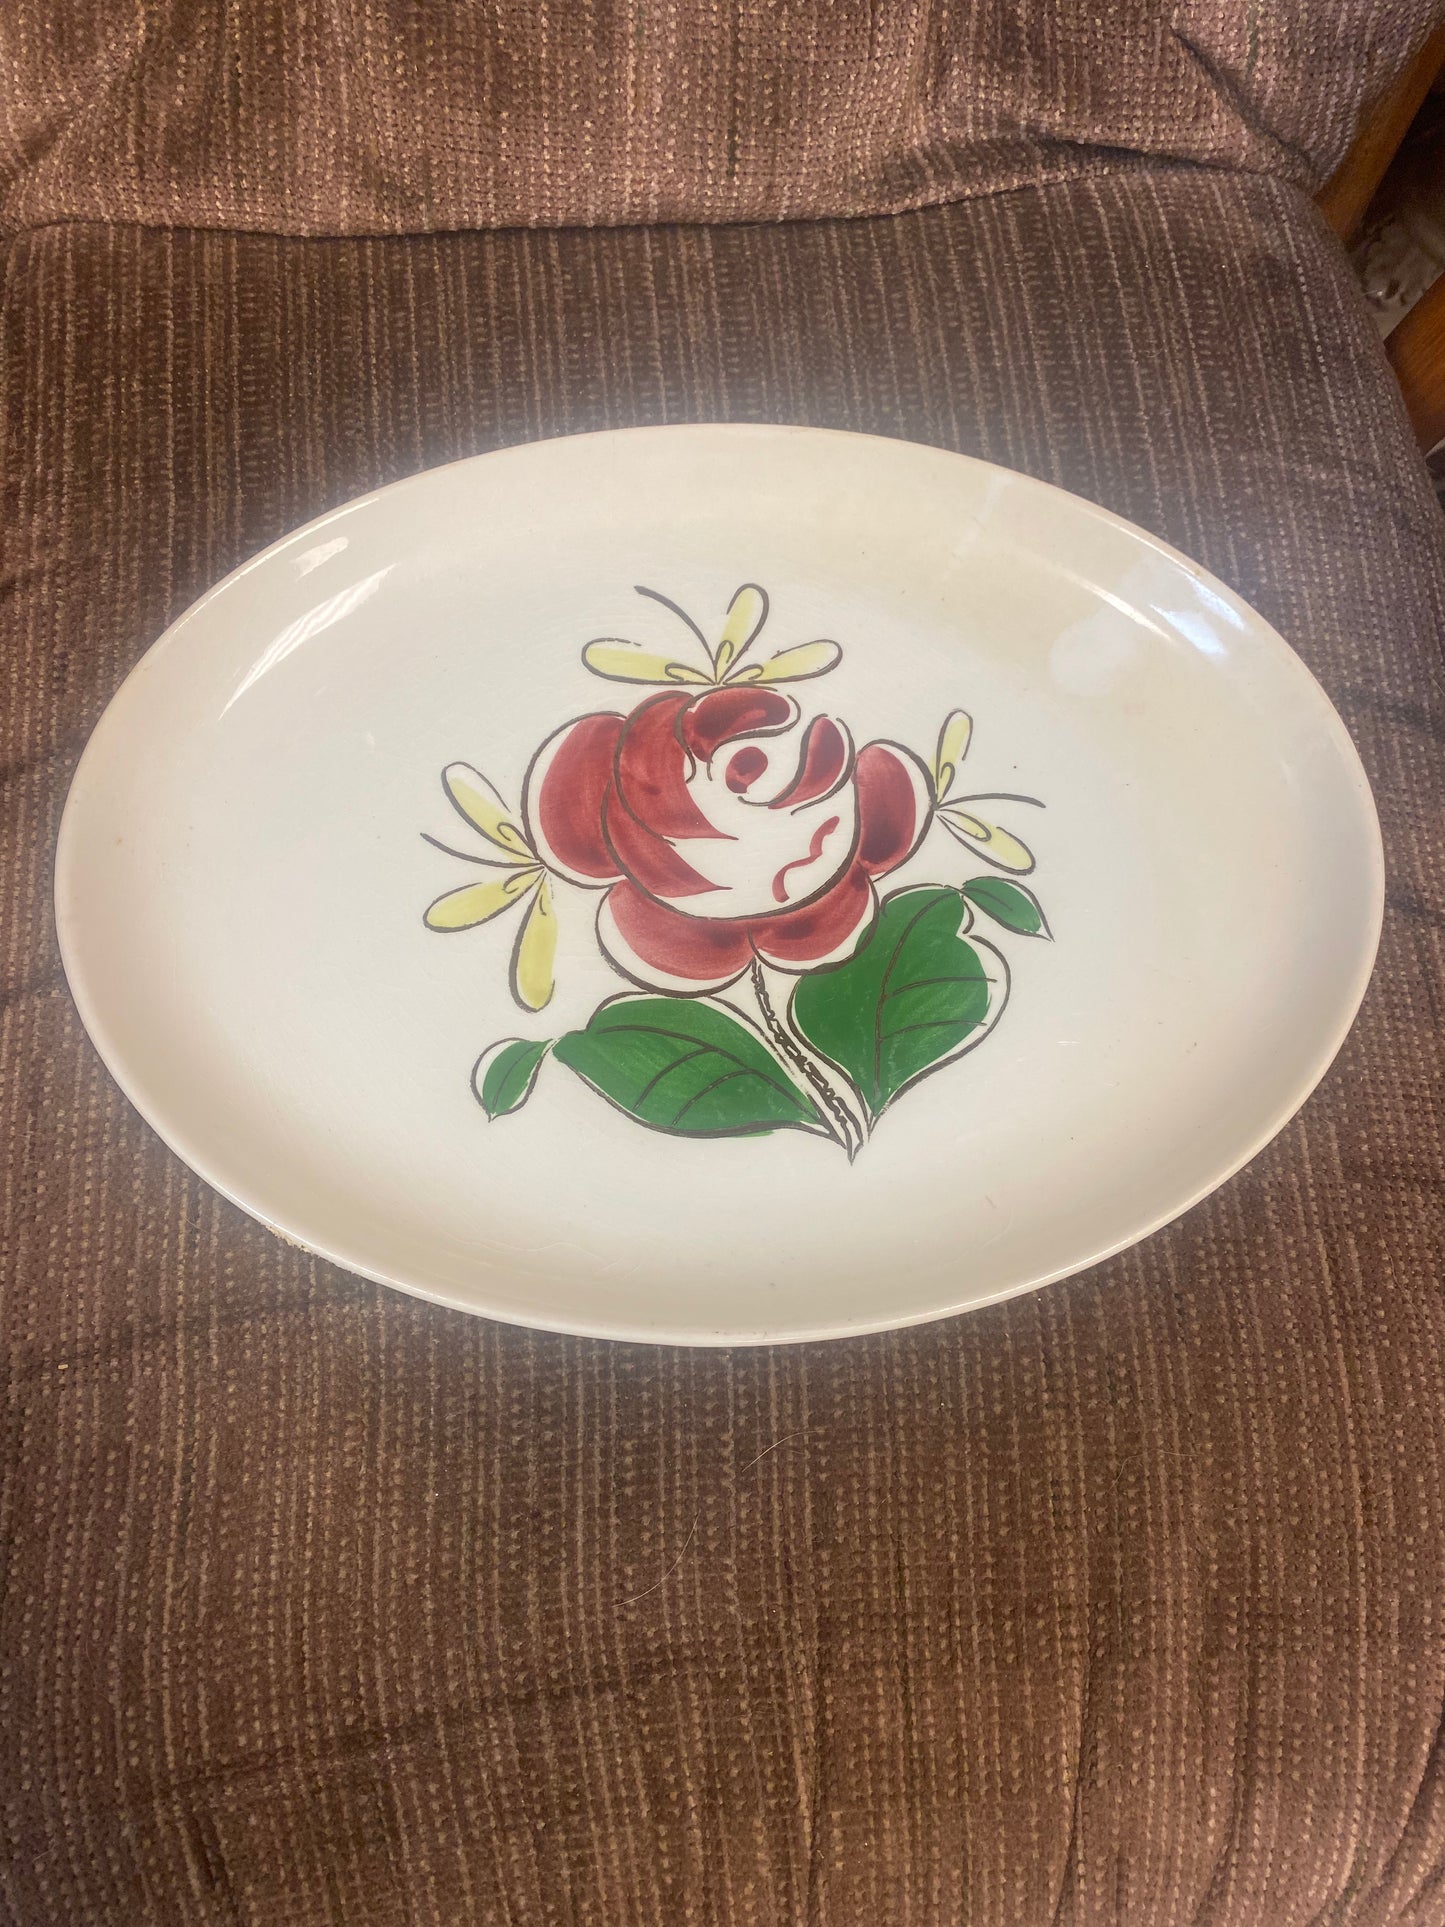 Stetson China Oval Platter Red Rose With Yellow Flowers Hand Painted